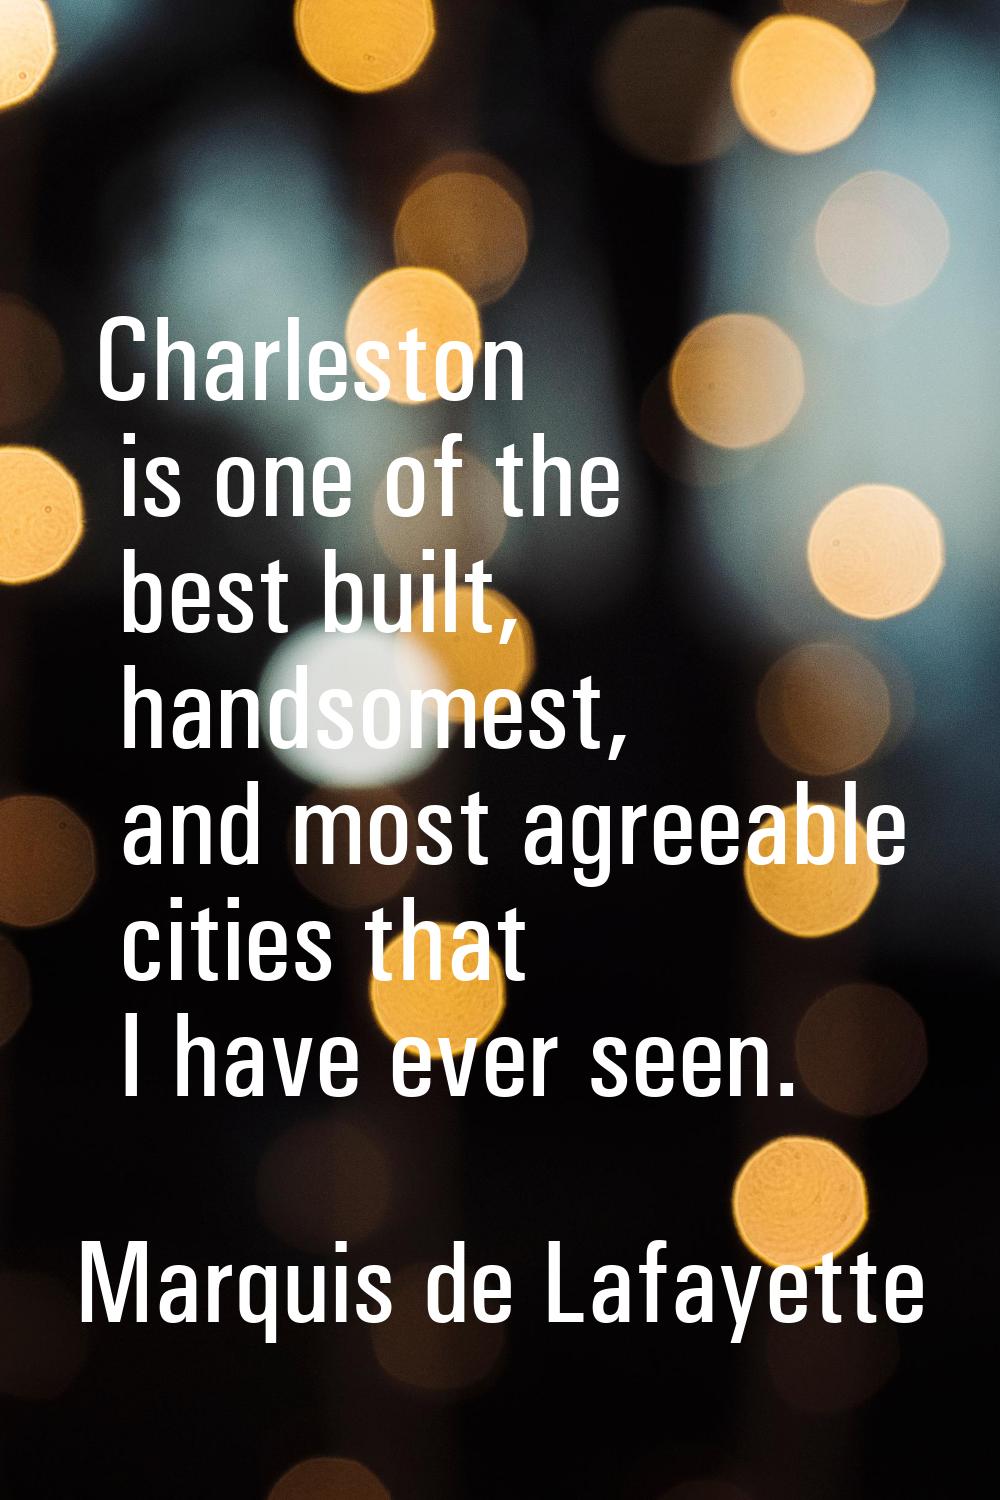 Charleston is one of the best built, handsomest, and most agreeable cities that I have ever seen.